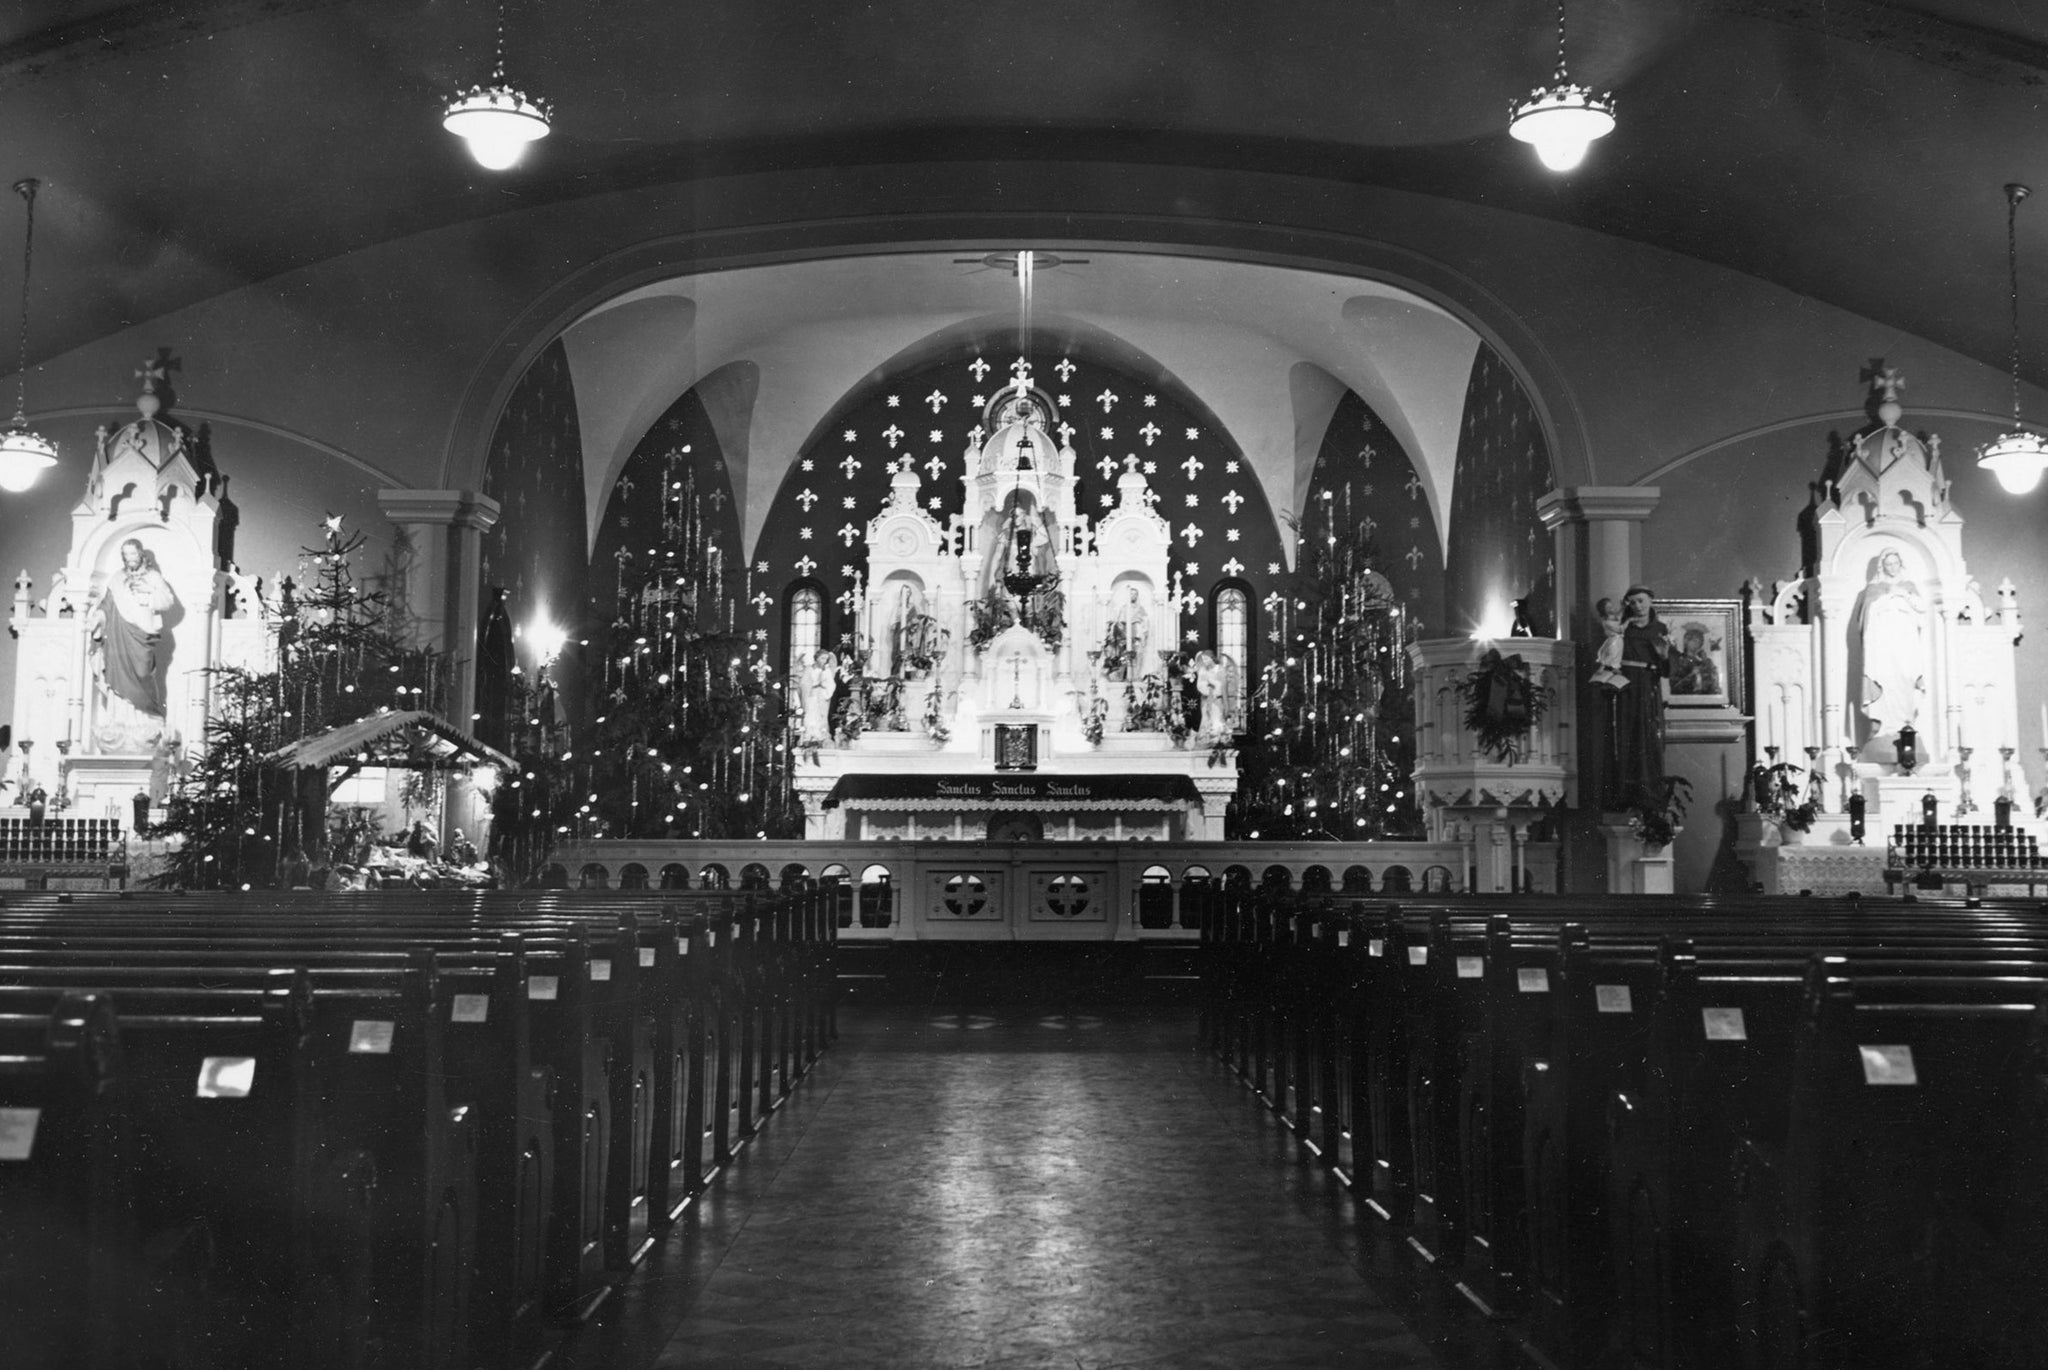 St. Florian Church at the corner of Hertel Avenue and St. Florian Street, decorated for Christmas in 1947. The church opened in 1916 and closed in 2007. -- AUDREY KAMINSKI